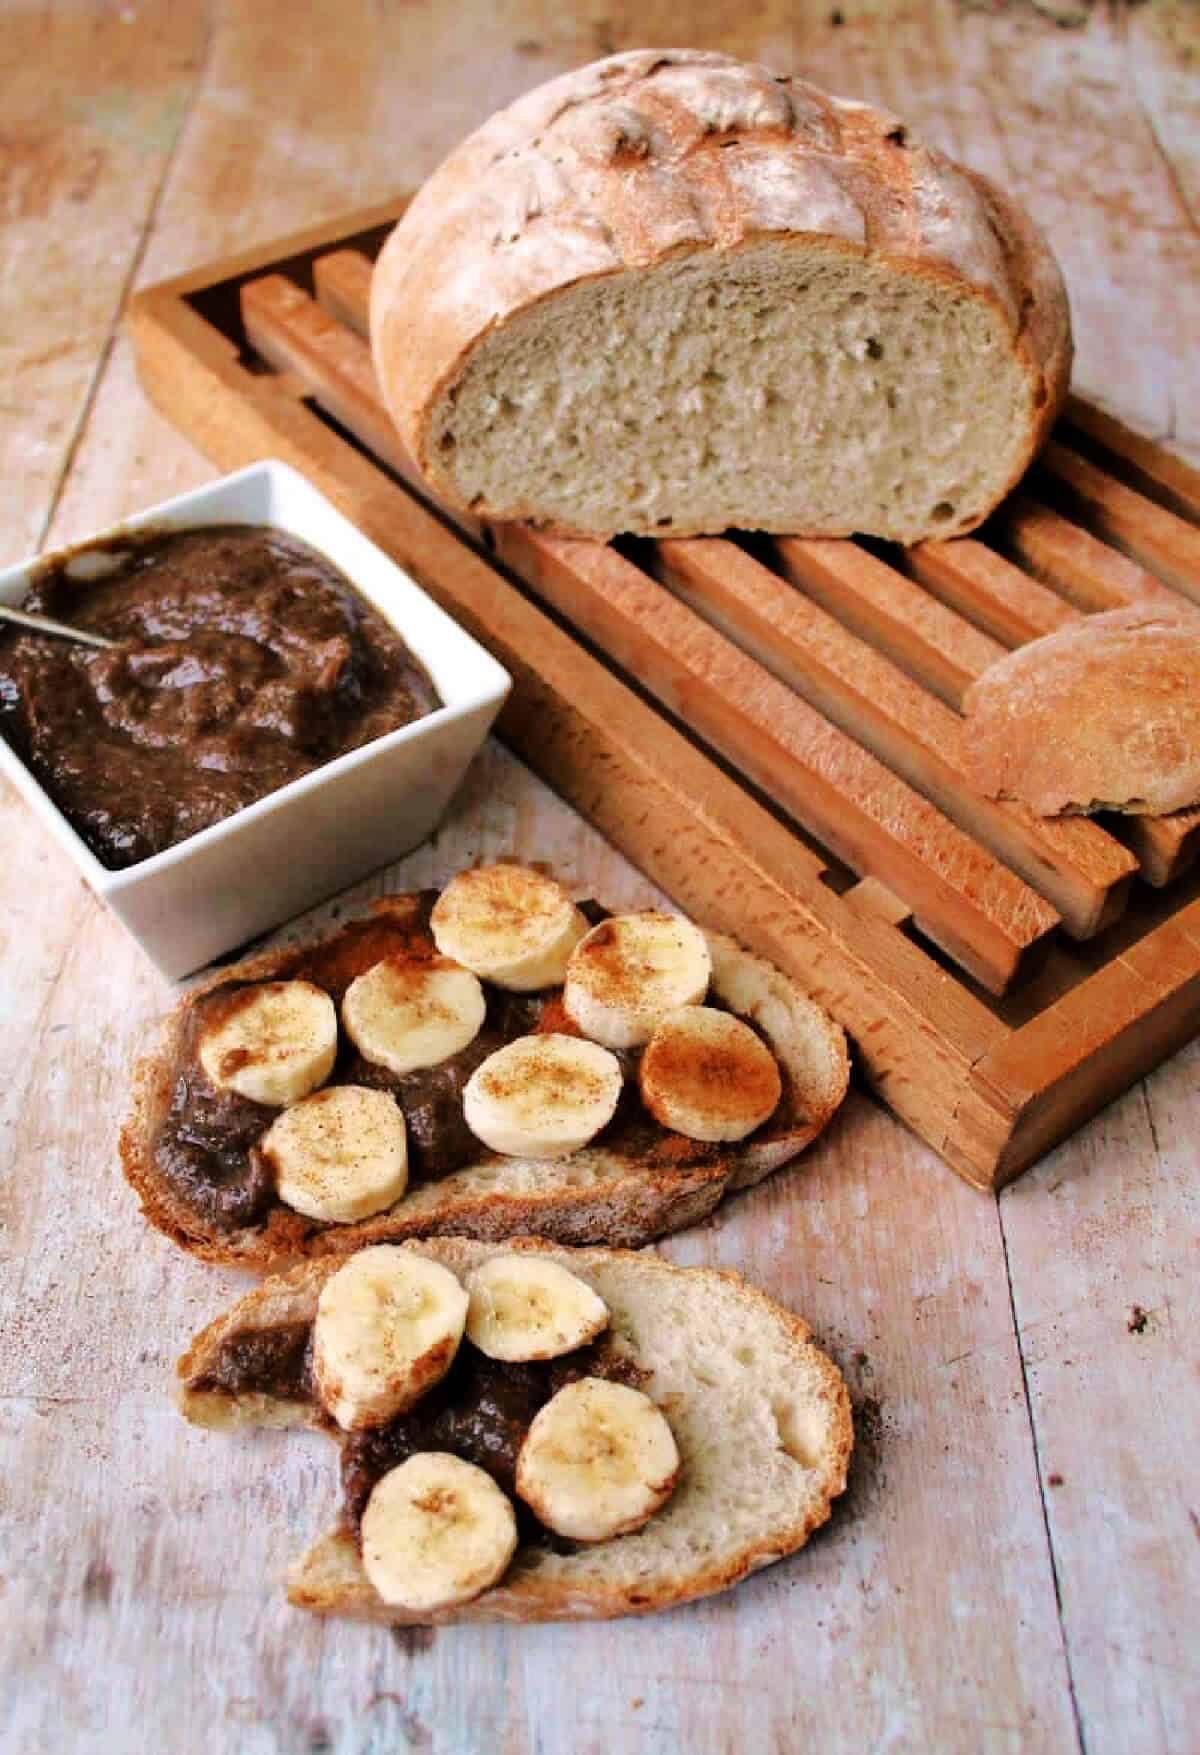 Loaf of bread with slices cut spread with banana butter topped with fresh banana slices.